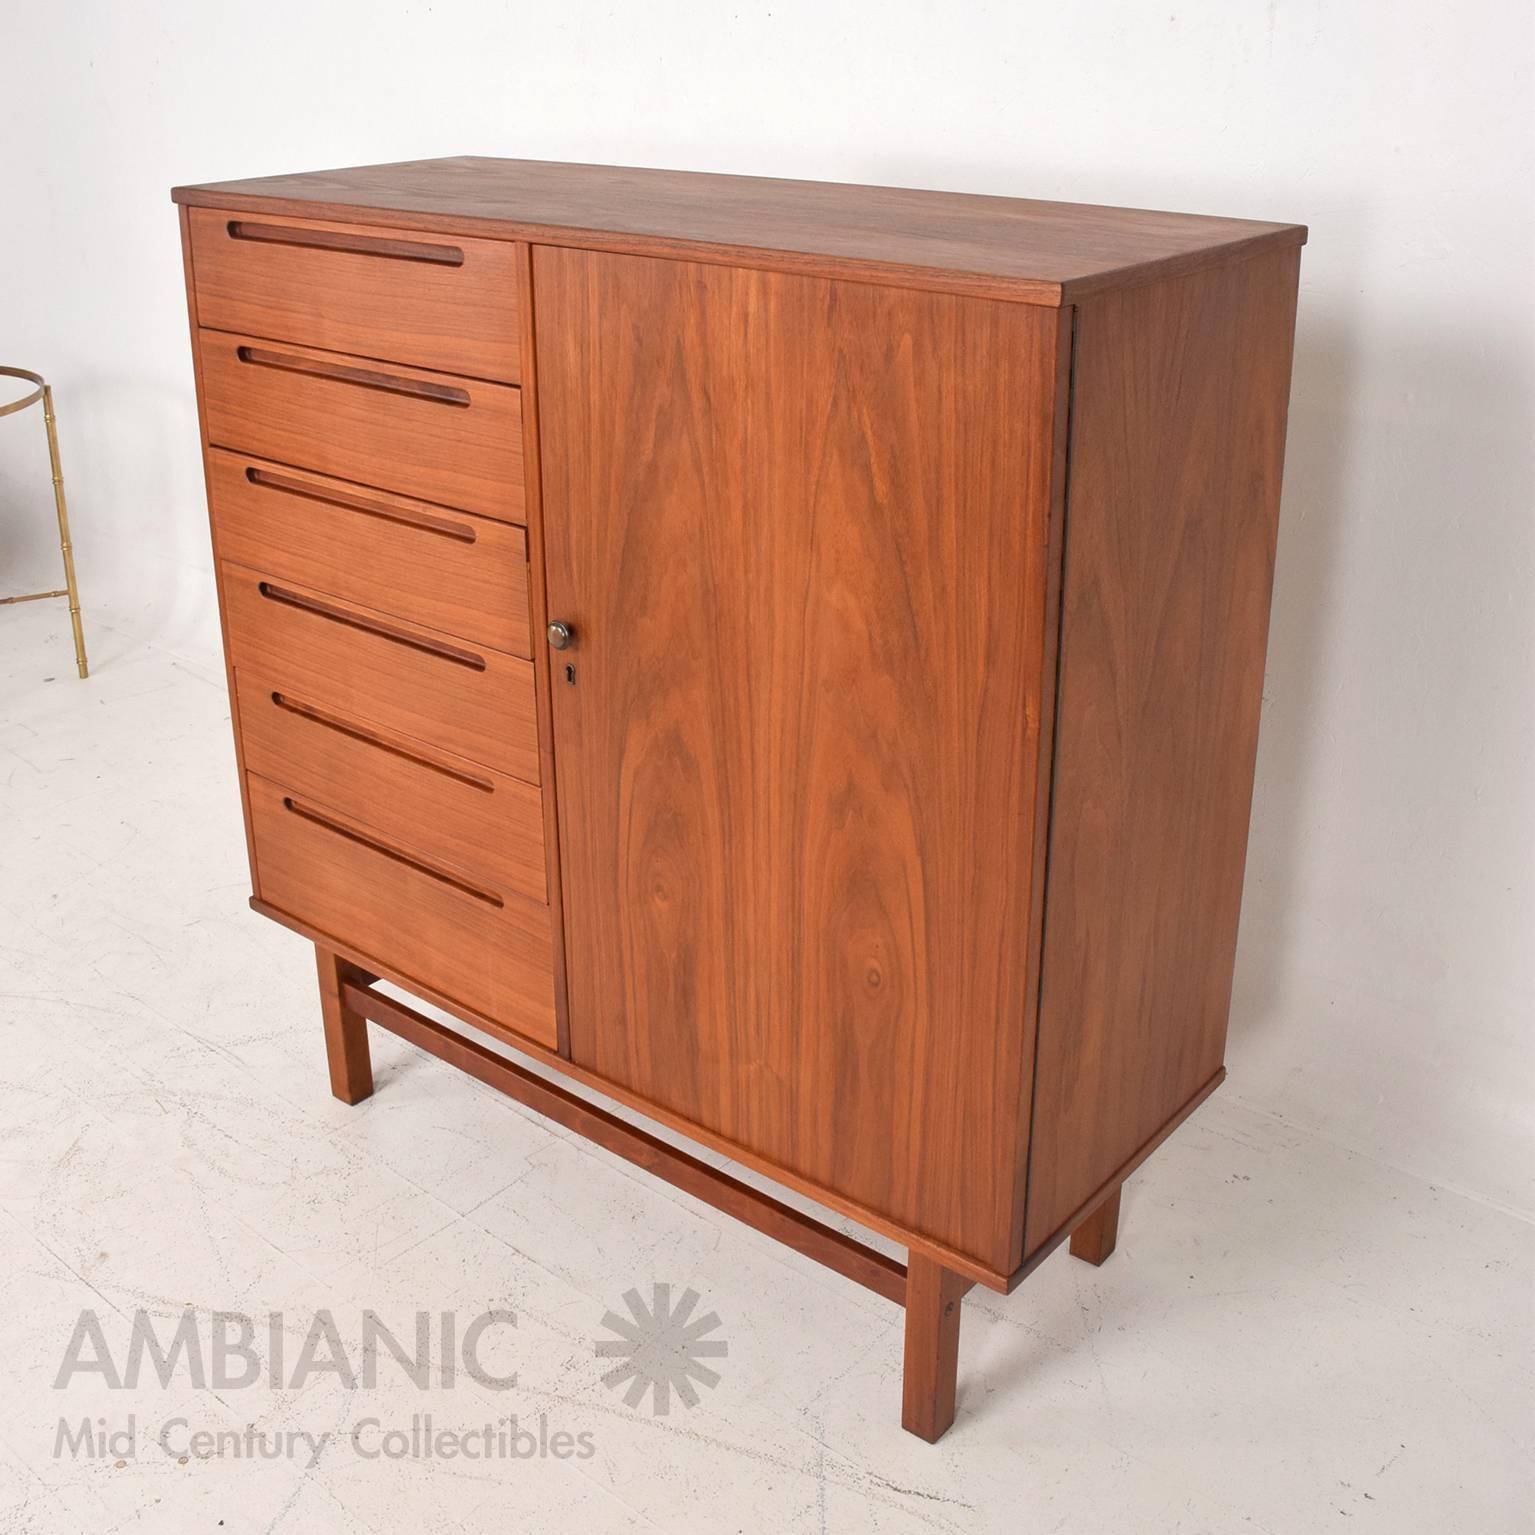 For your consideration a tall highboy in teak wood by Nils Jonsson. Clean modern lines with sculptural pull handles. All drawers open and close with ease and are constructed with double dove tail joints. 

The right side has a door which cover